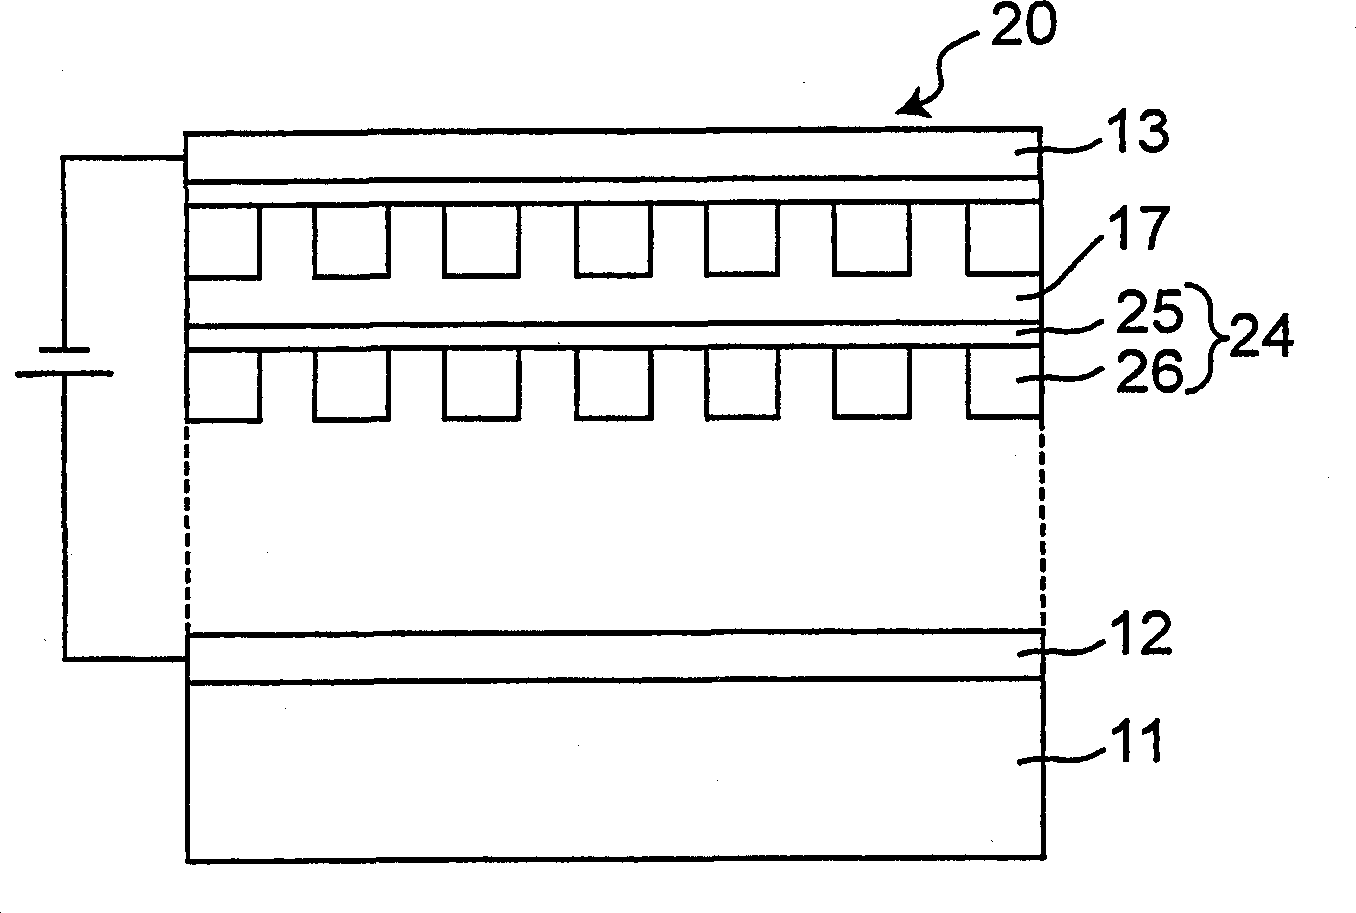 Electroluminescent device and display